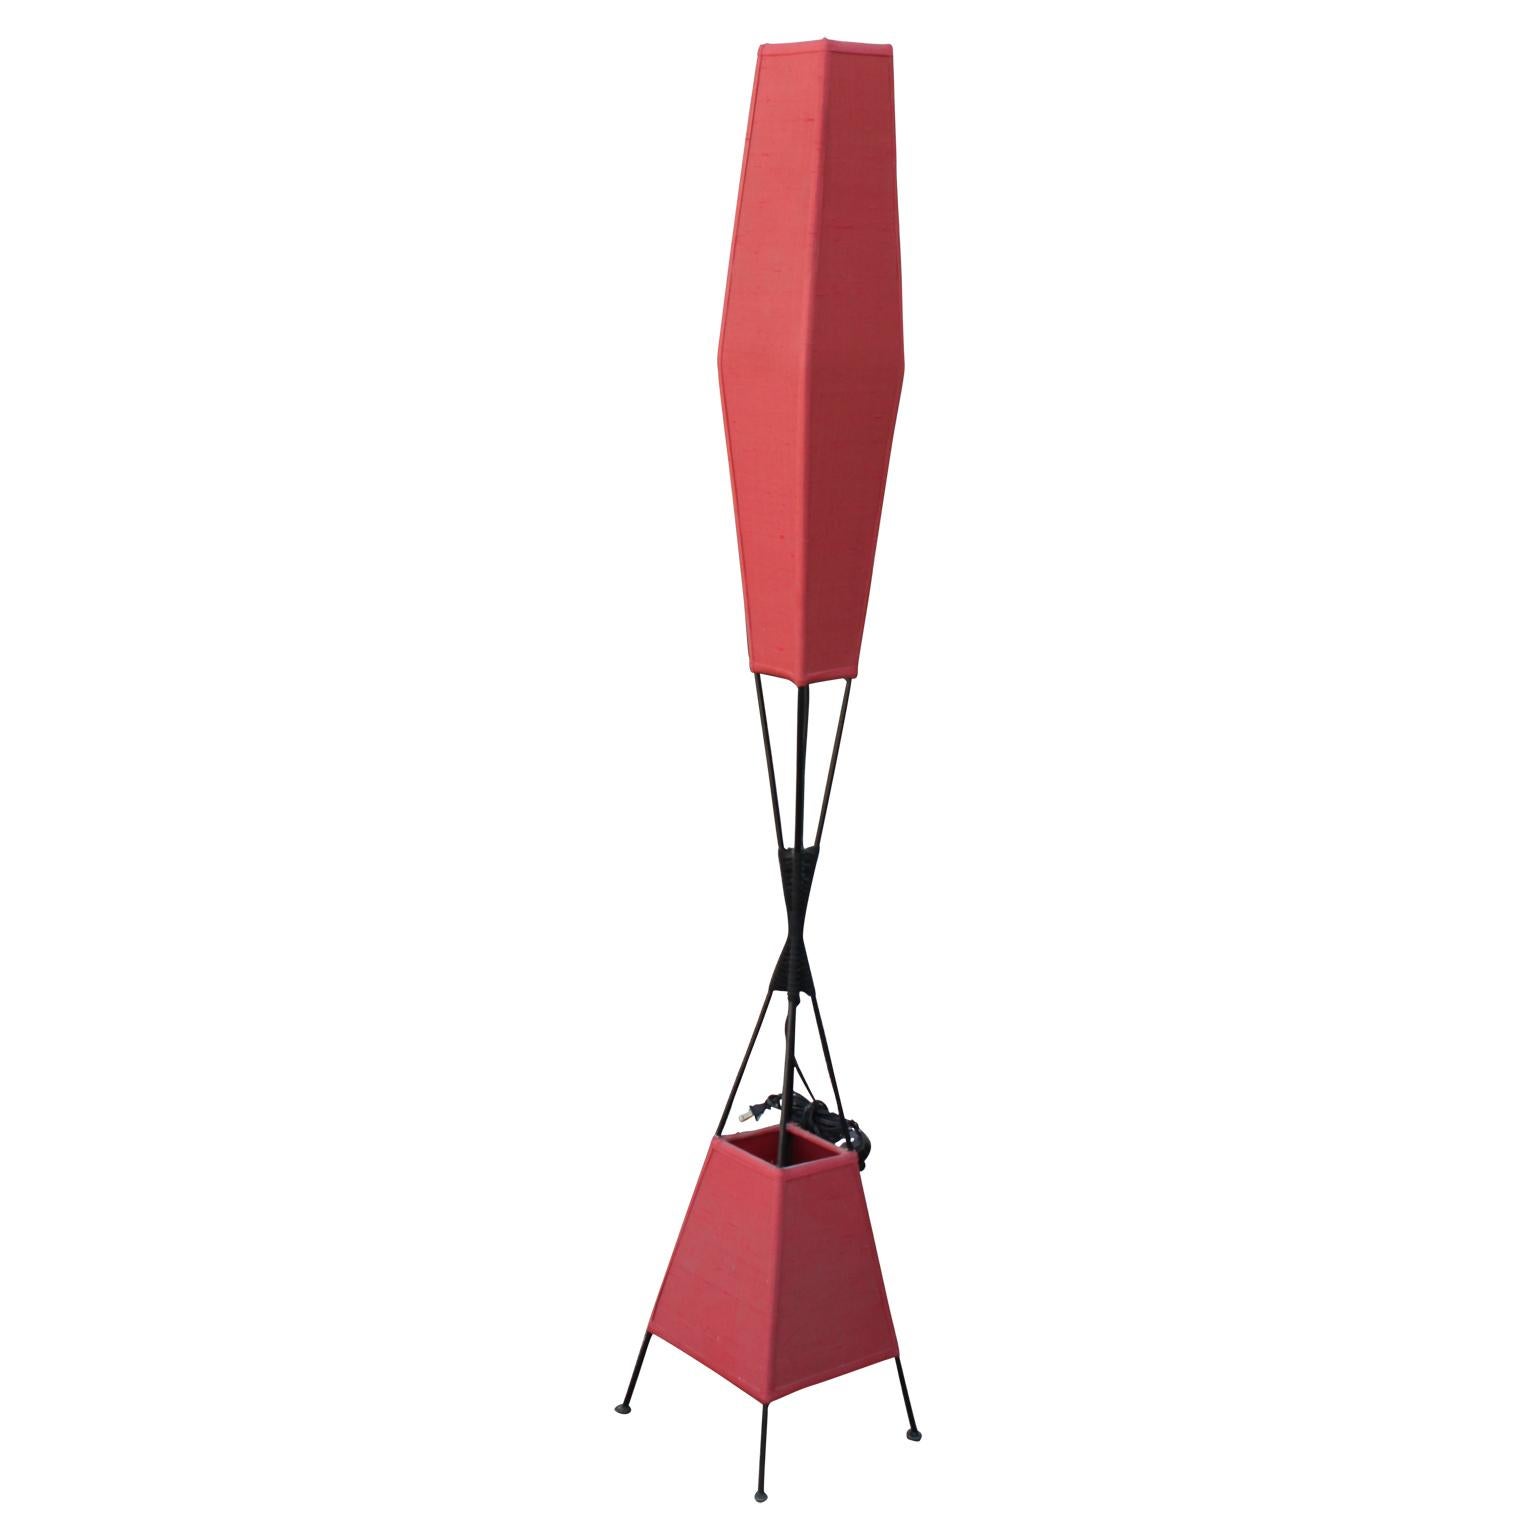 Modern wrought iron and red floor lamp. In the style of Raymor or Tony Paul. Unique lamp to add to any space.